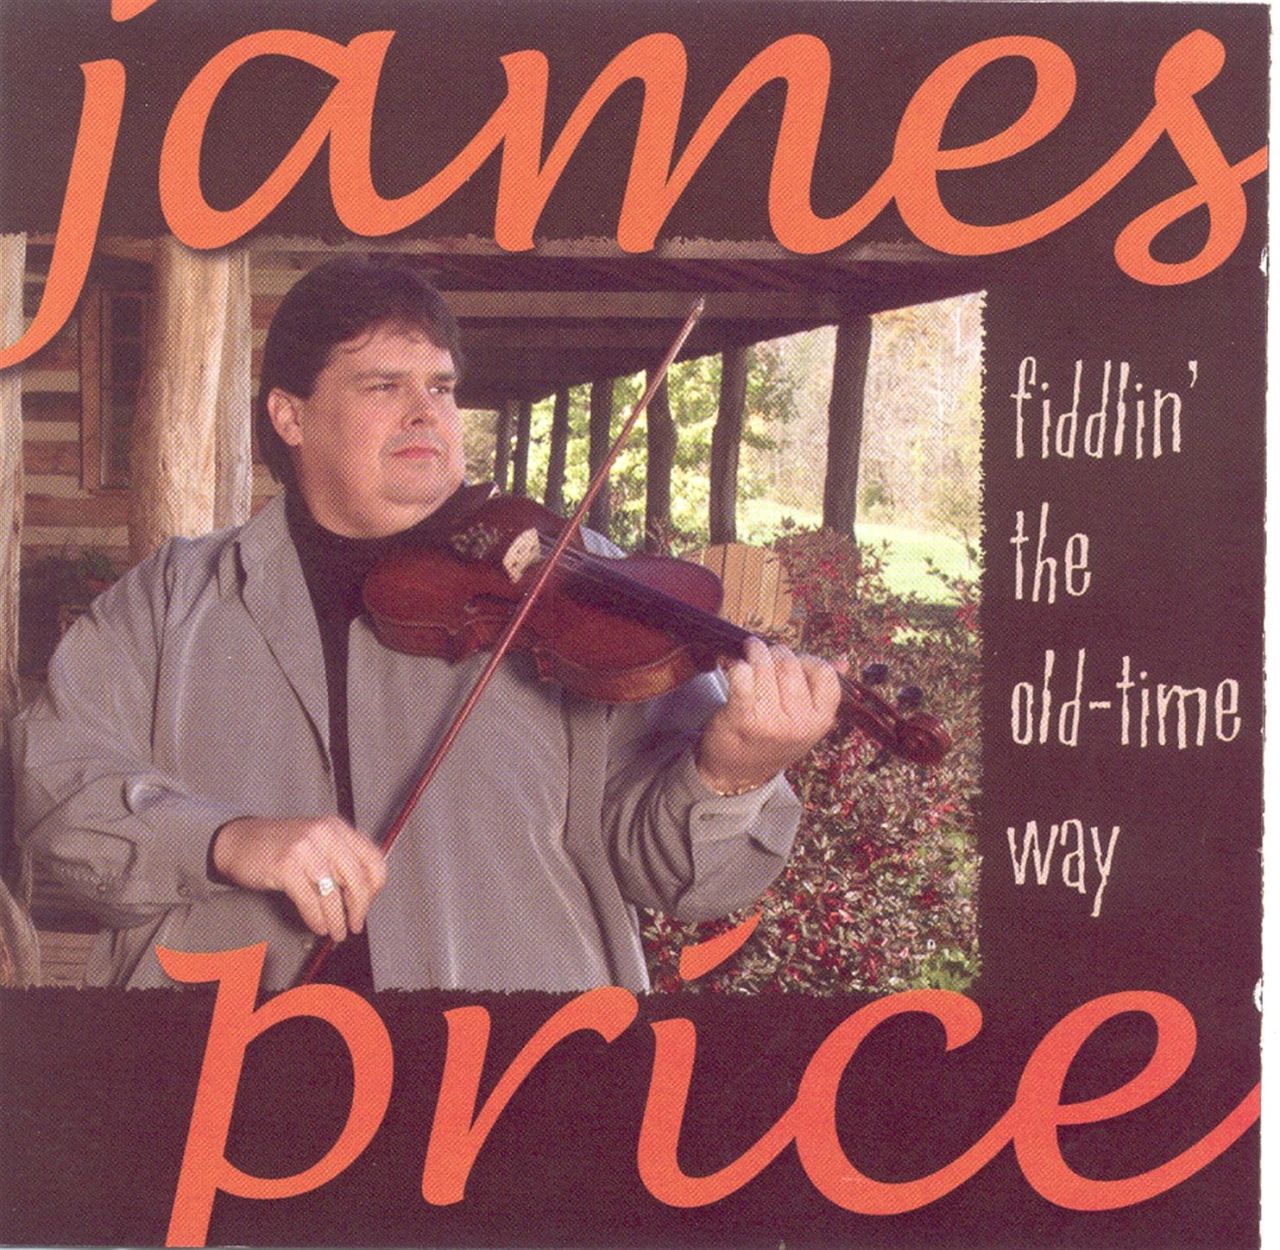 James Price – “Fiddlin' The Old-Time Way”